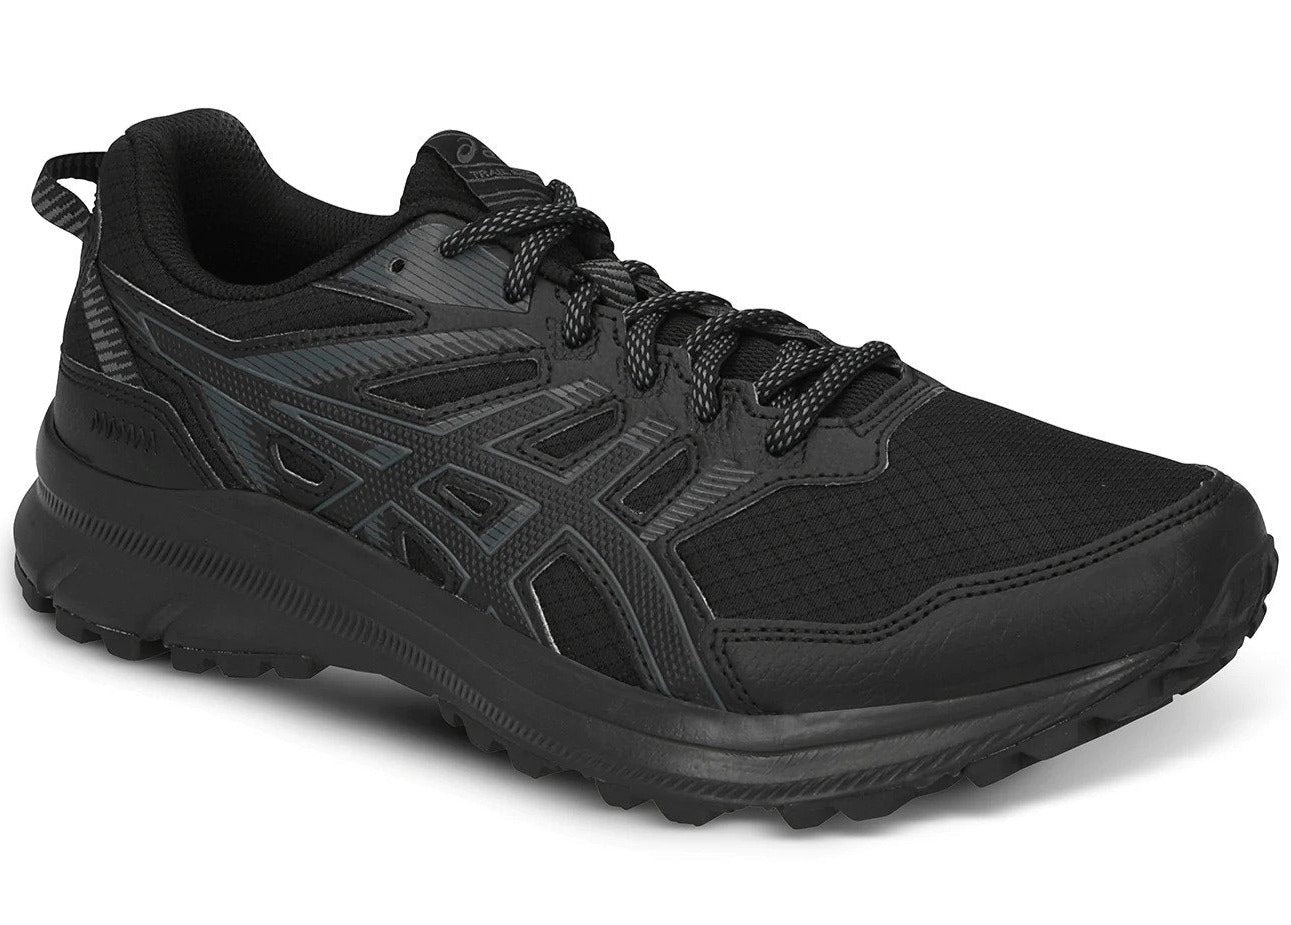 ASICS Men's Trail Scout 2 Running Shoes - Black/Carrier Grey